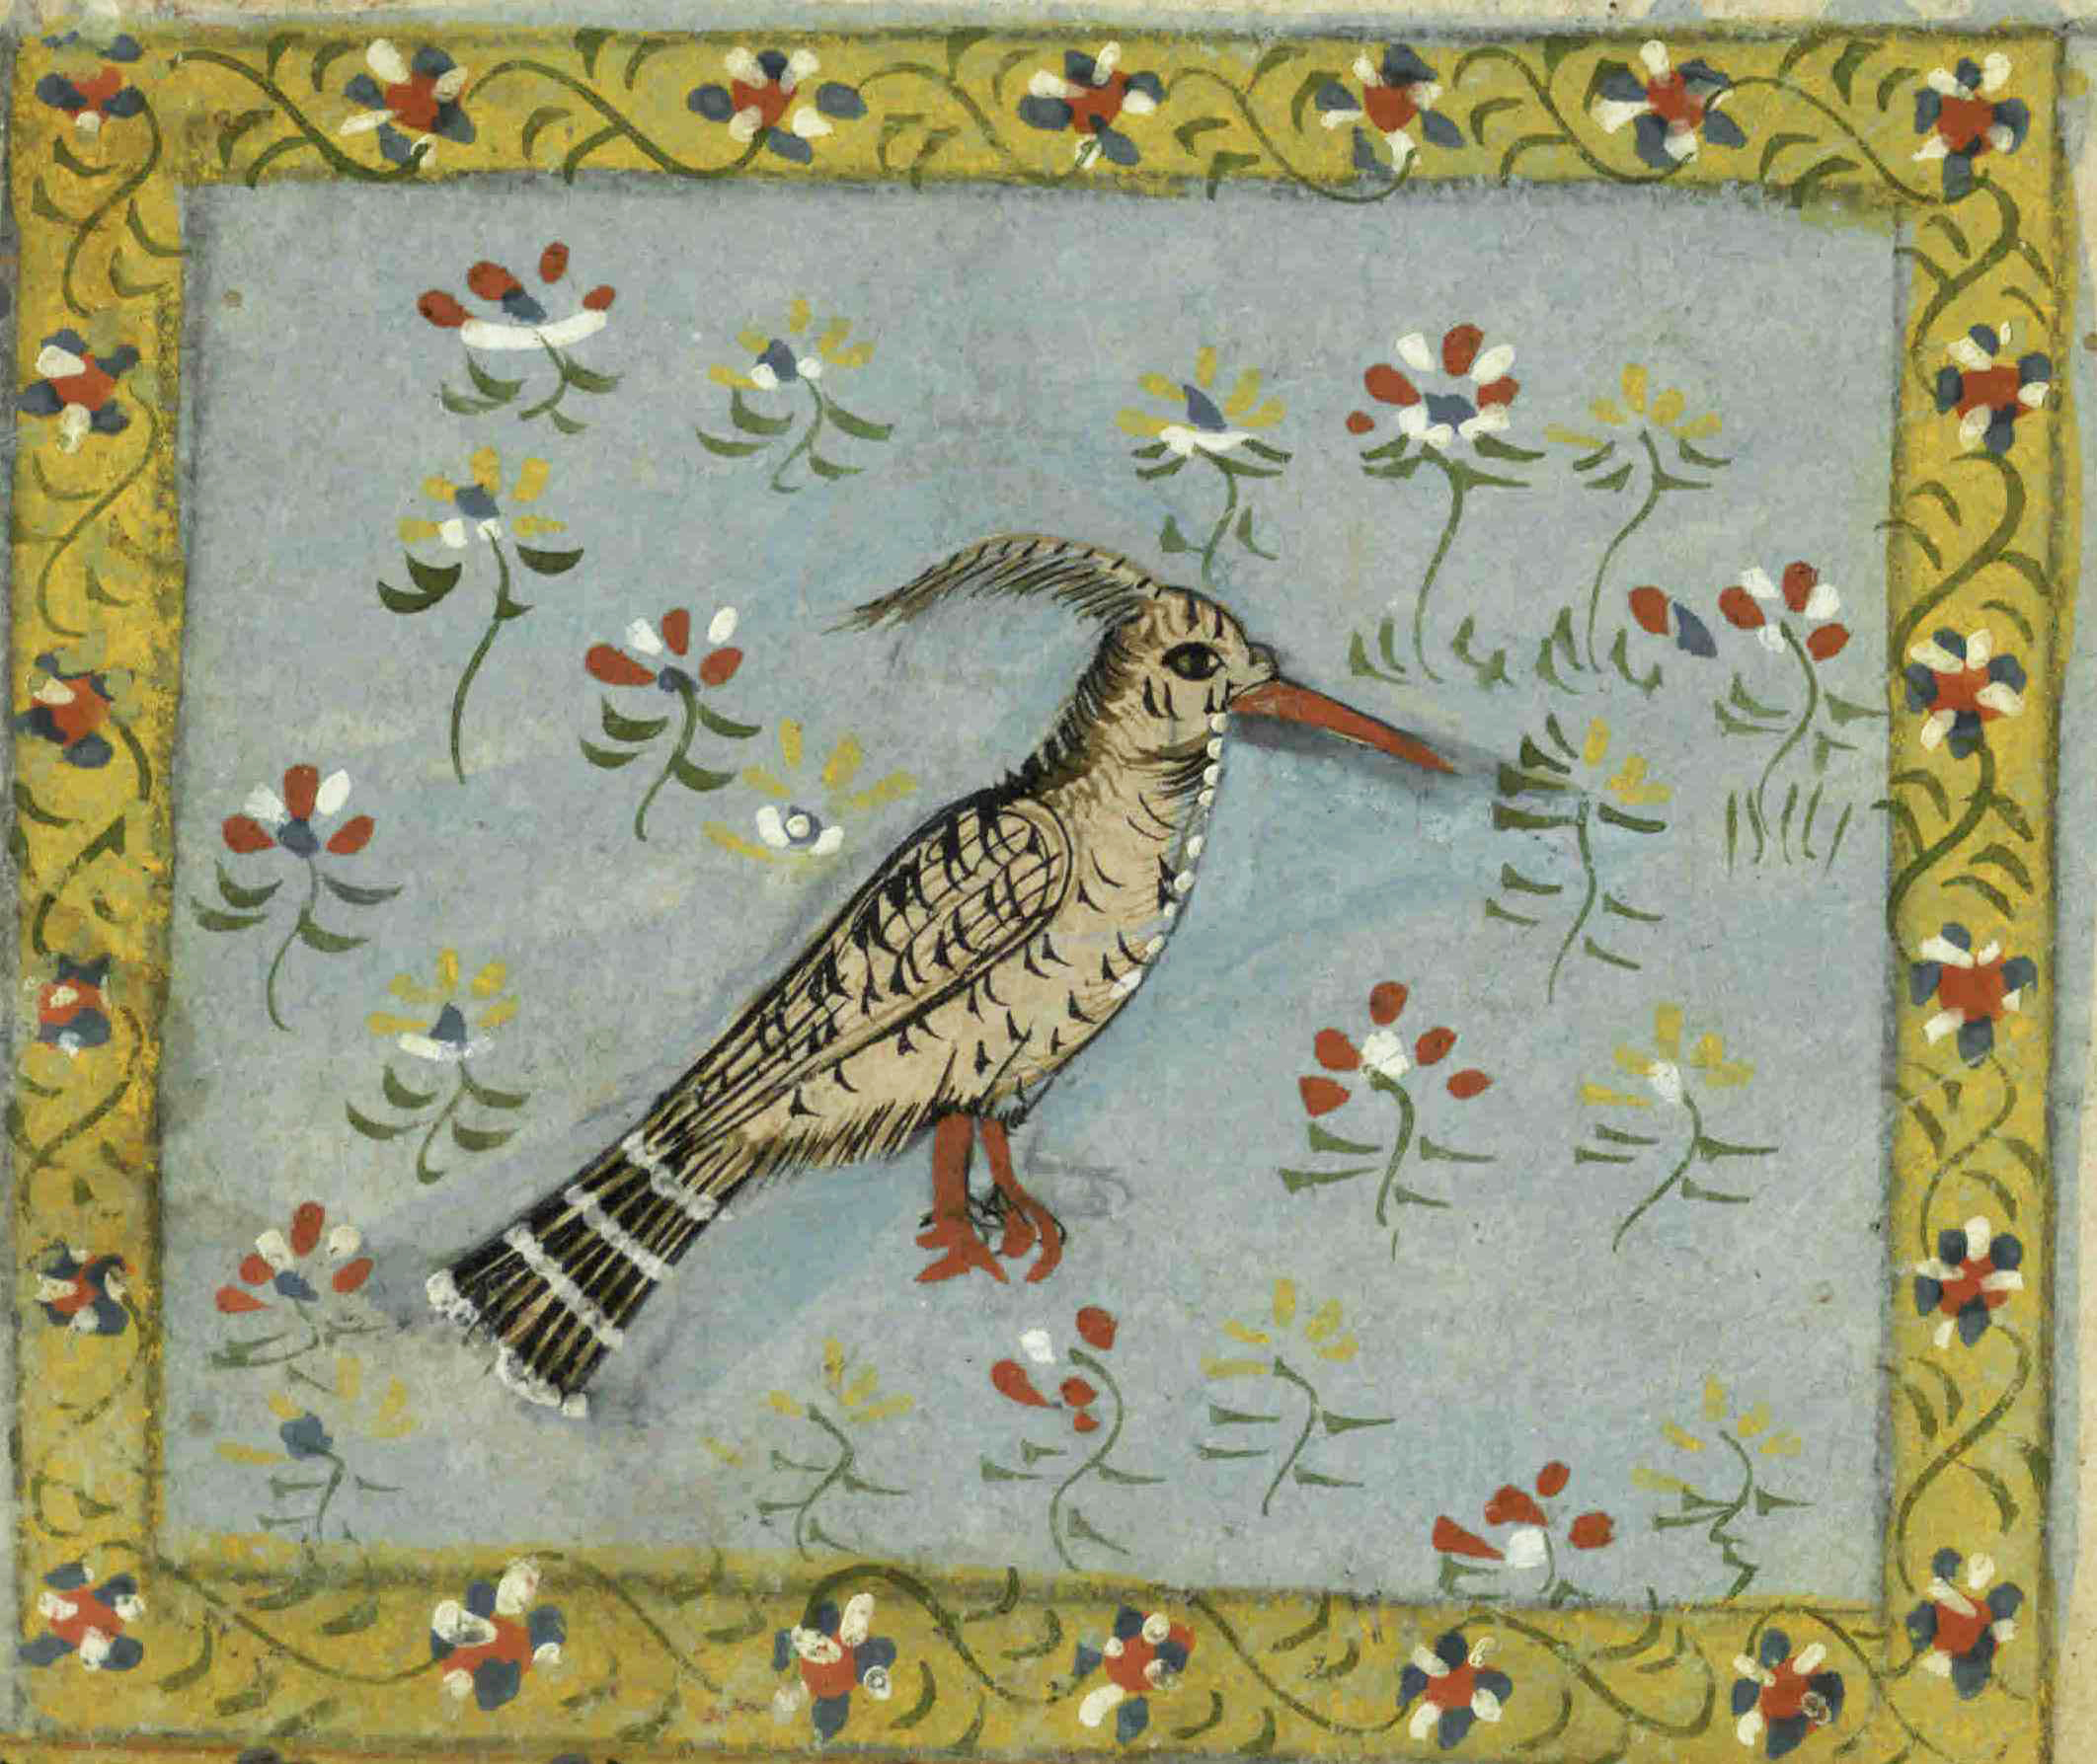 A hoopoe from 17th or 18th century manuscript copy of “The Book of Wonders of the Age” (St Andrews ms32(o))